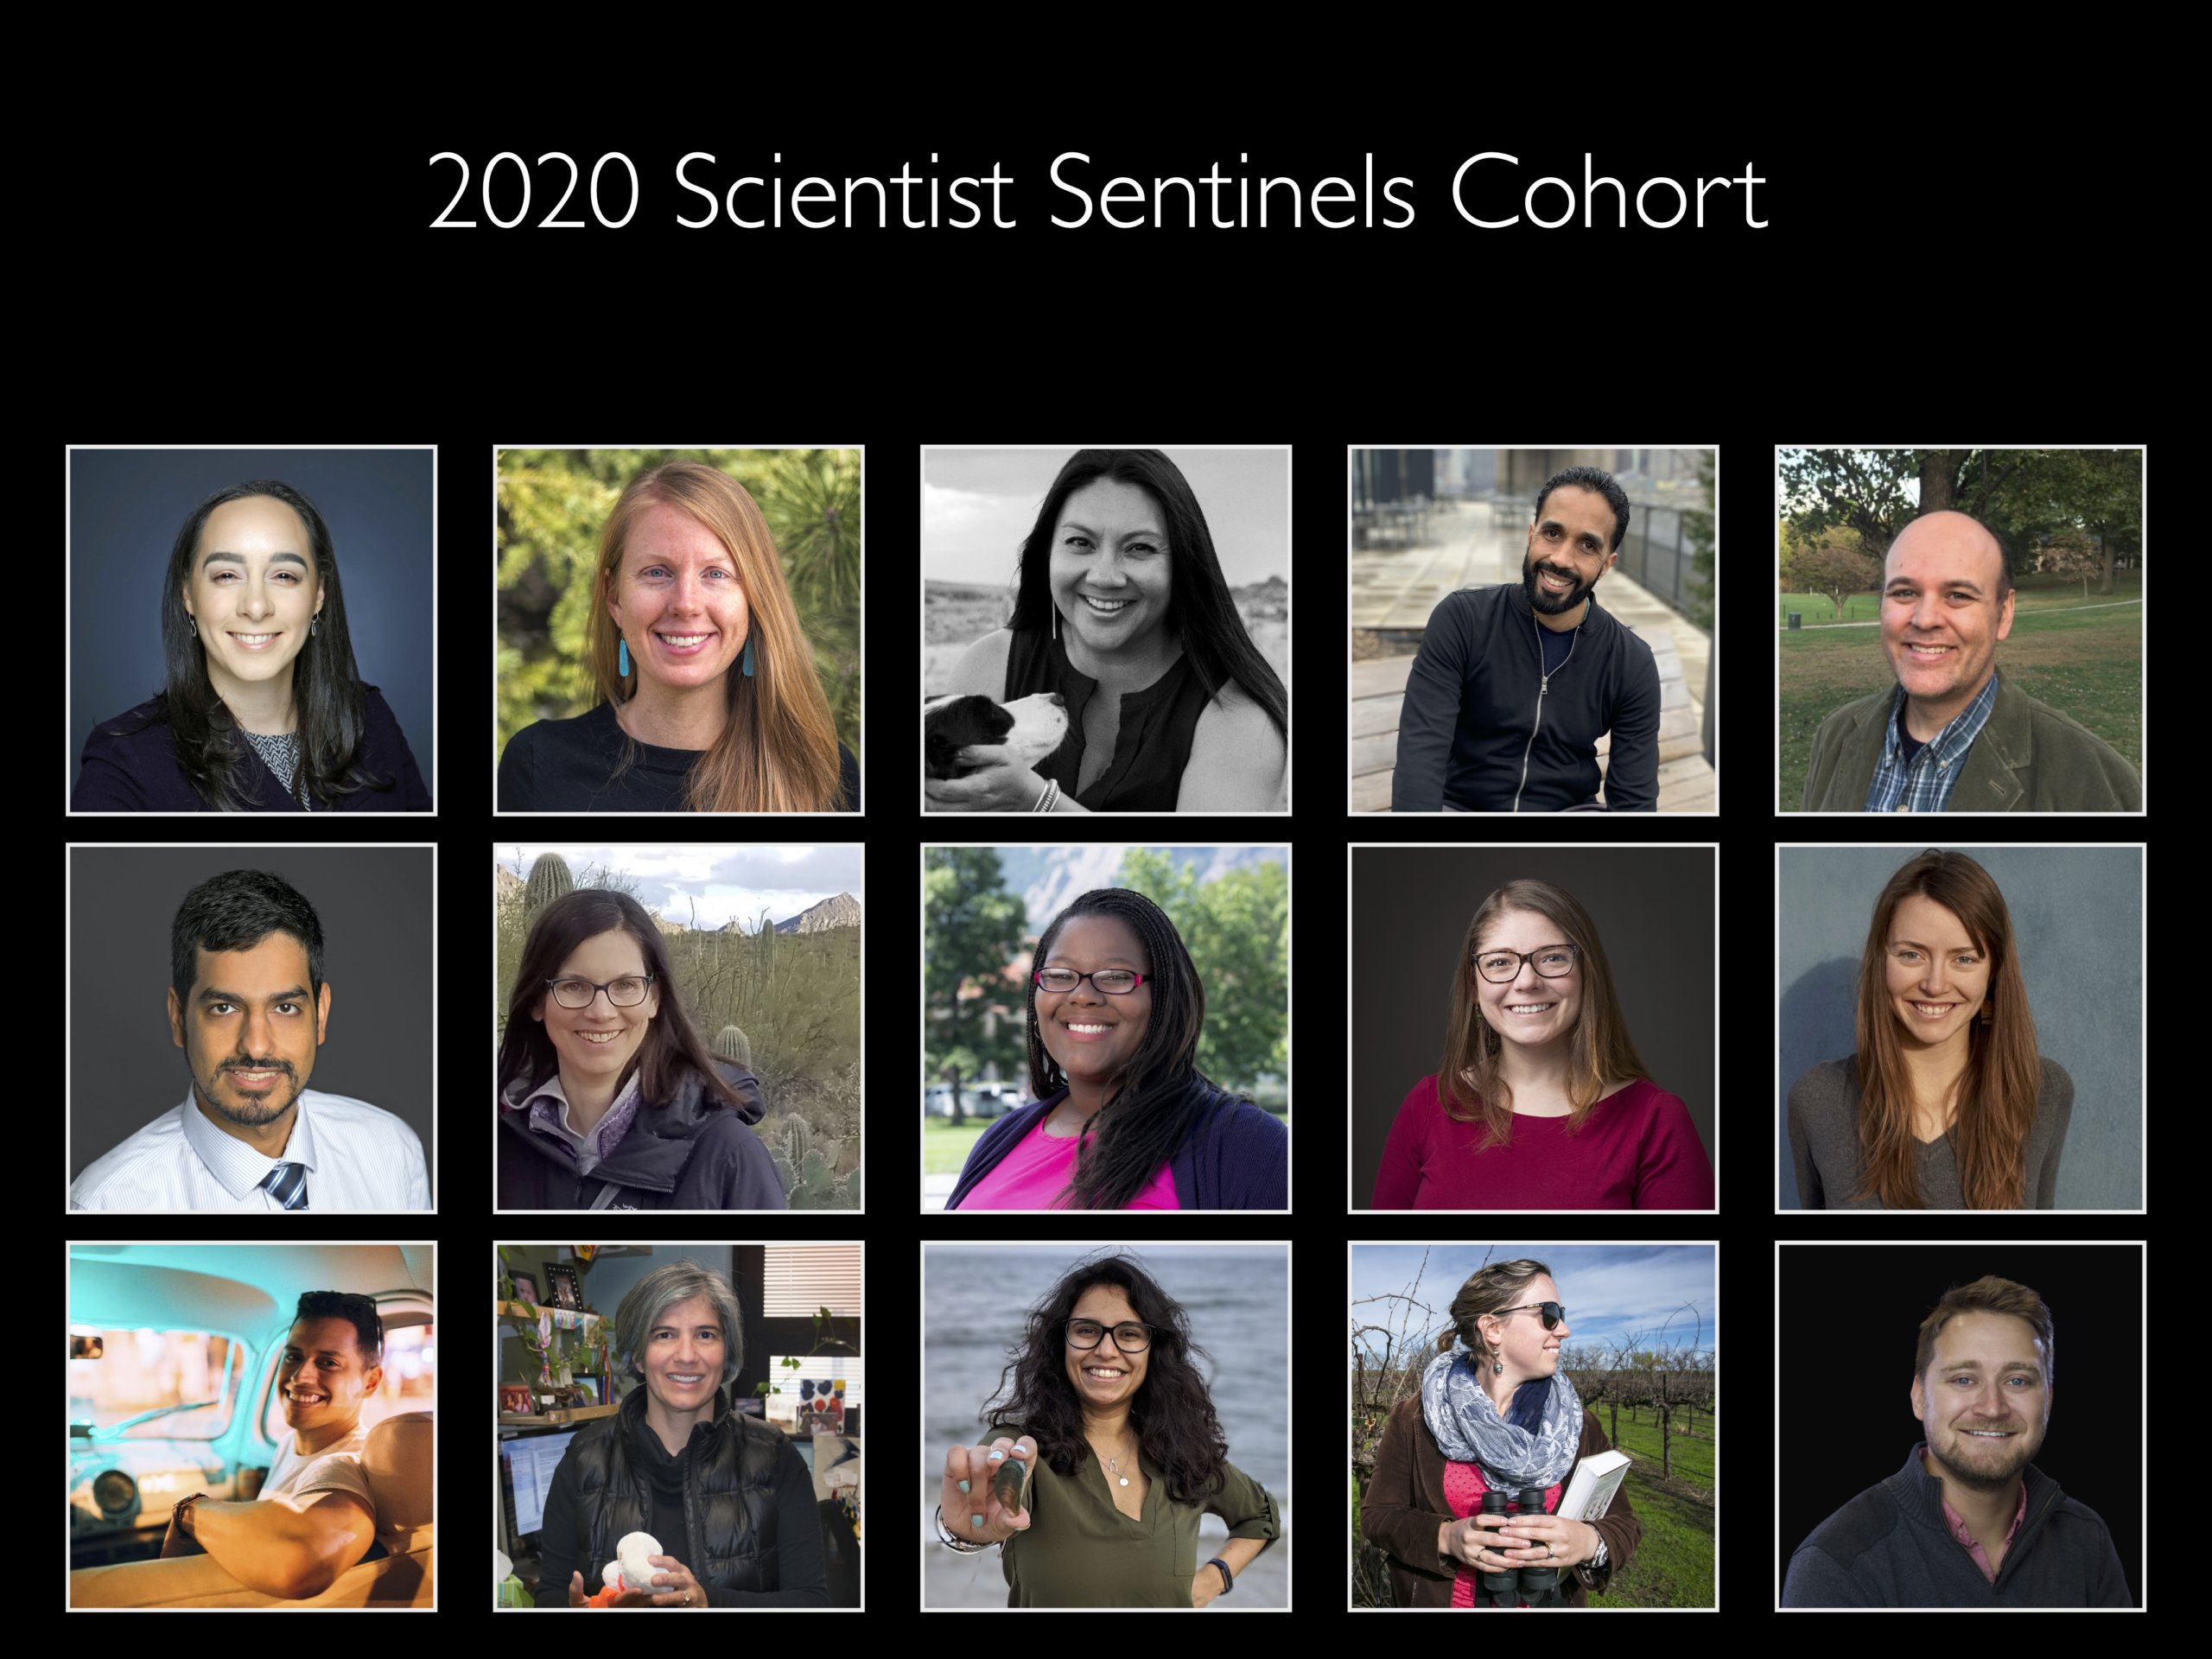 Composite image of the fifteen 2020 Scientist Sentinels.